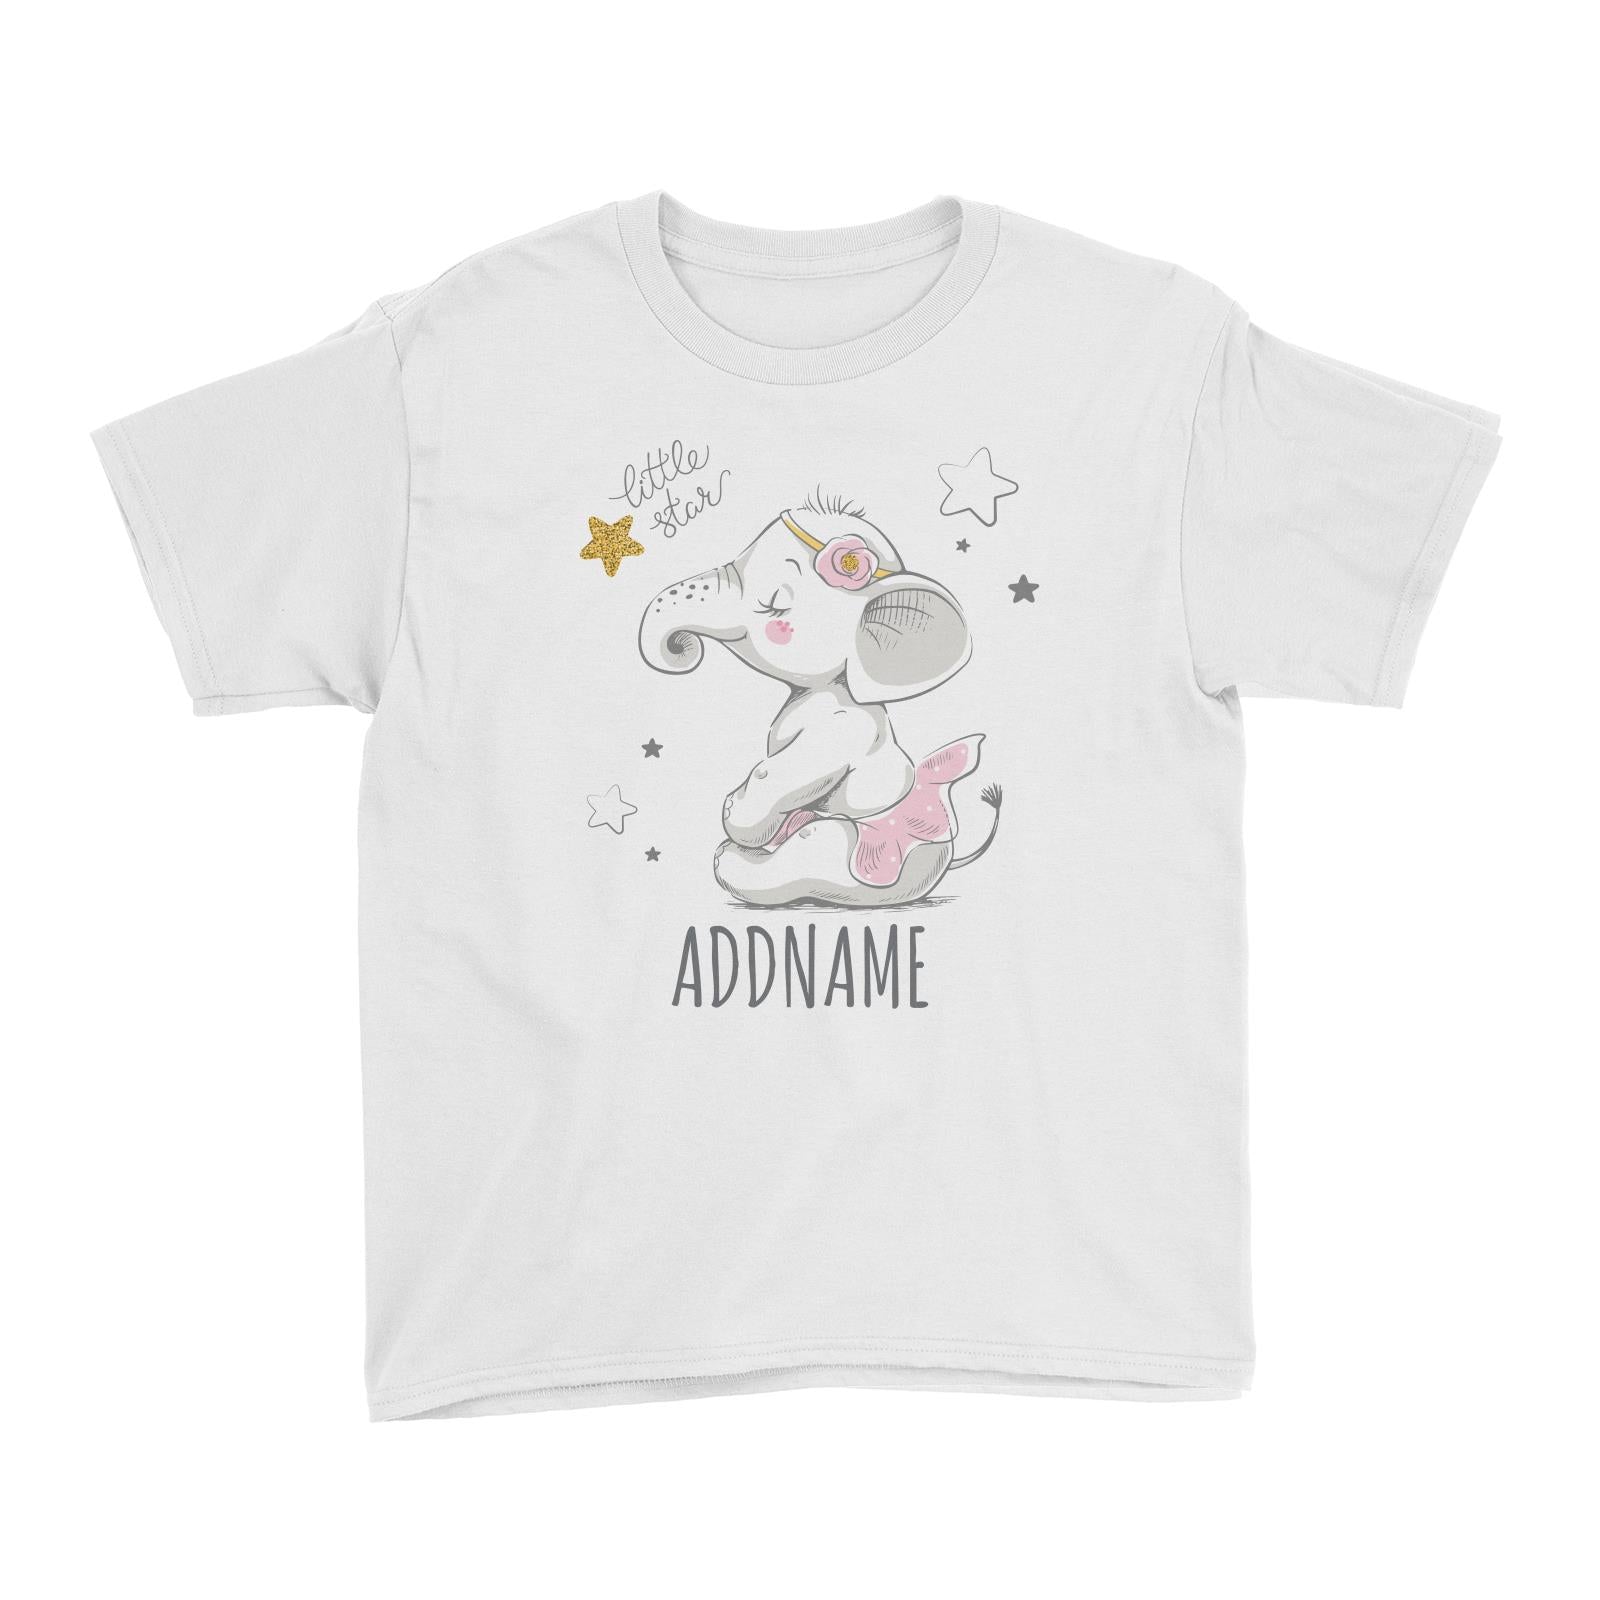 Elephant Little Star White Kid's T-Shirt Personalizable Designs Cute Sweet Animal Pinky For Girls HG